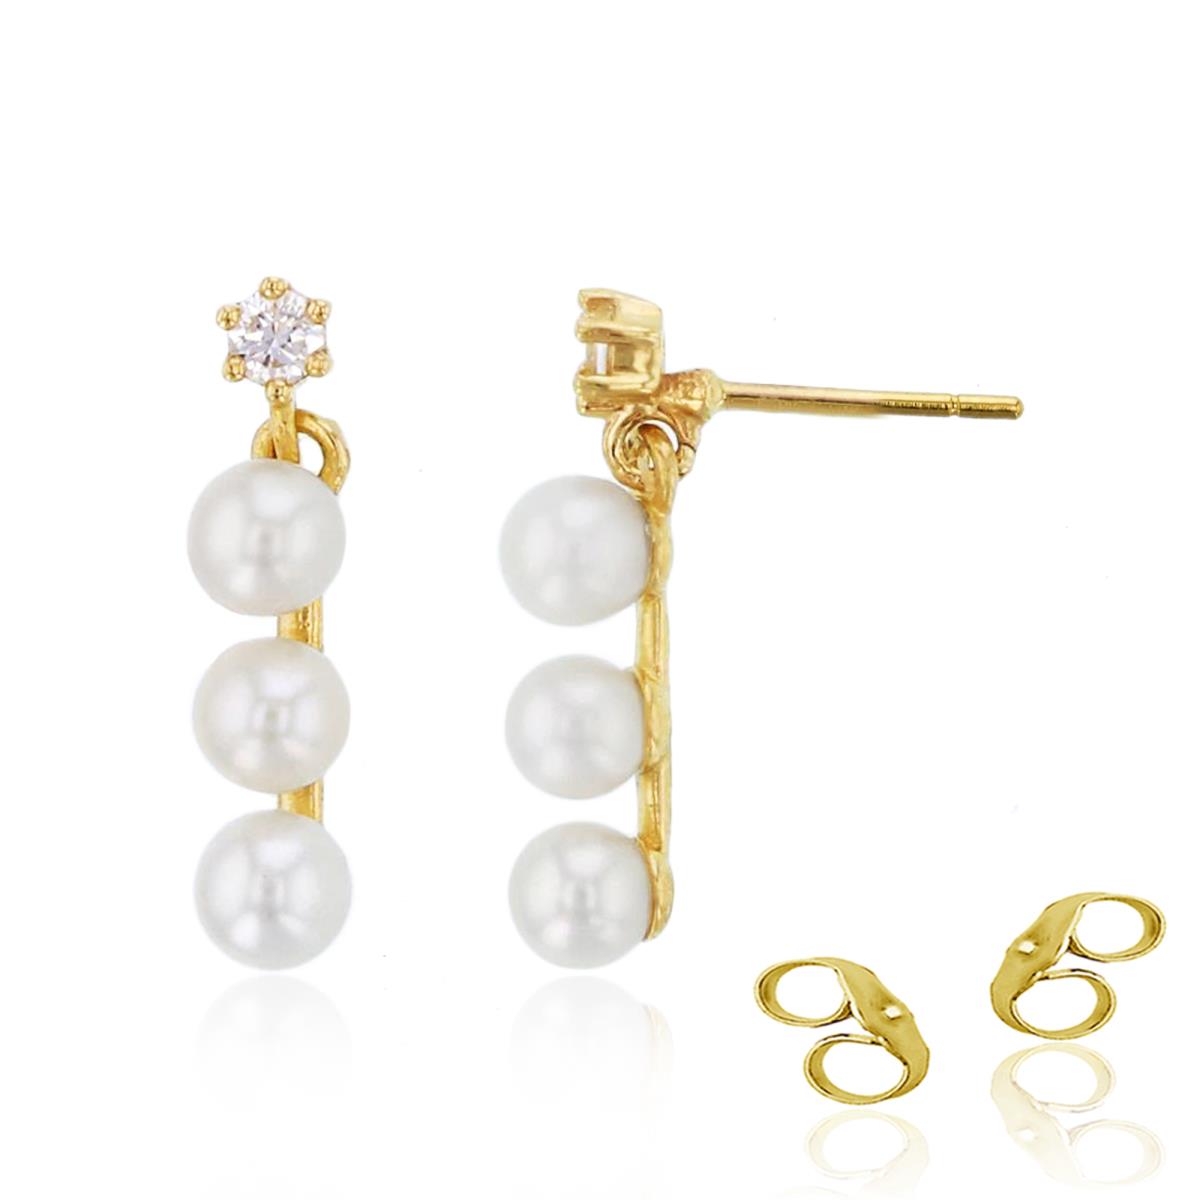 14K Yellow Gold Rnd Cr. White Sapphire & Fresh Water Pearl Dangling Earrings with 4.5mm Clutch